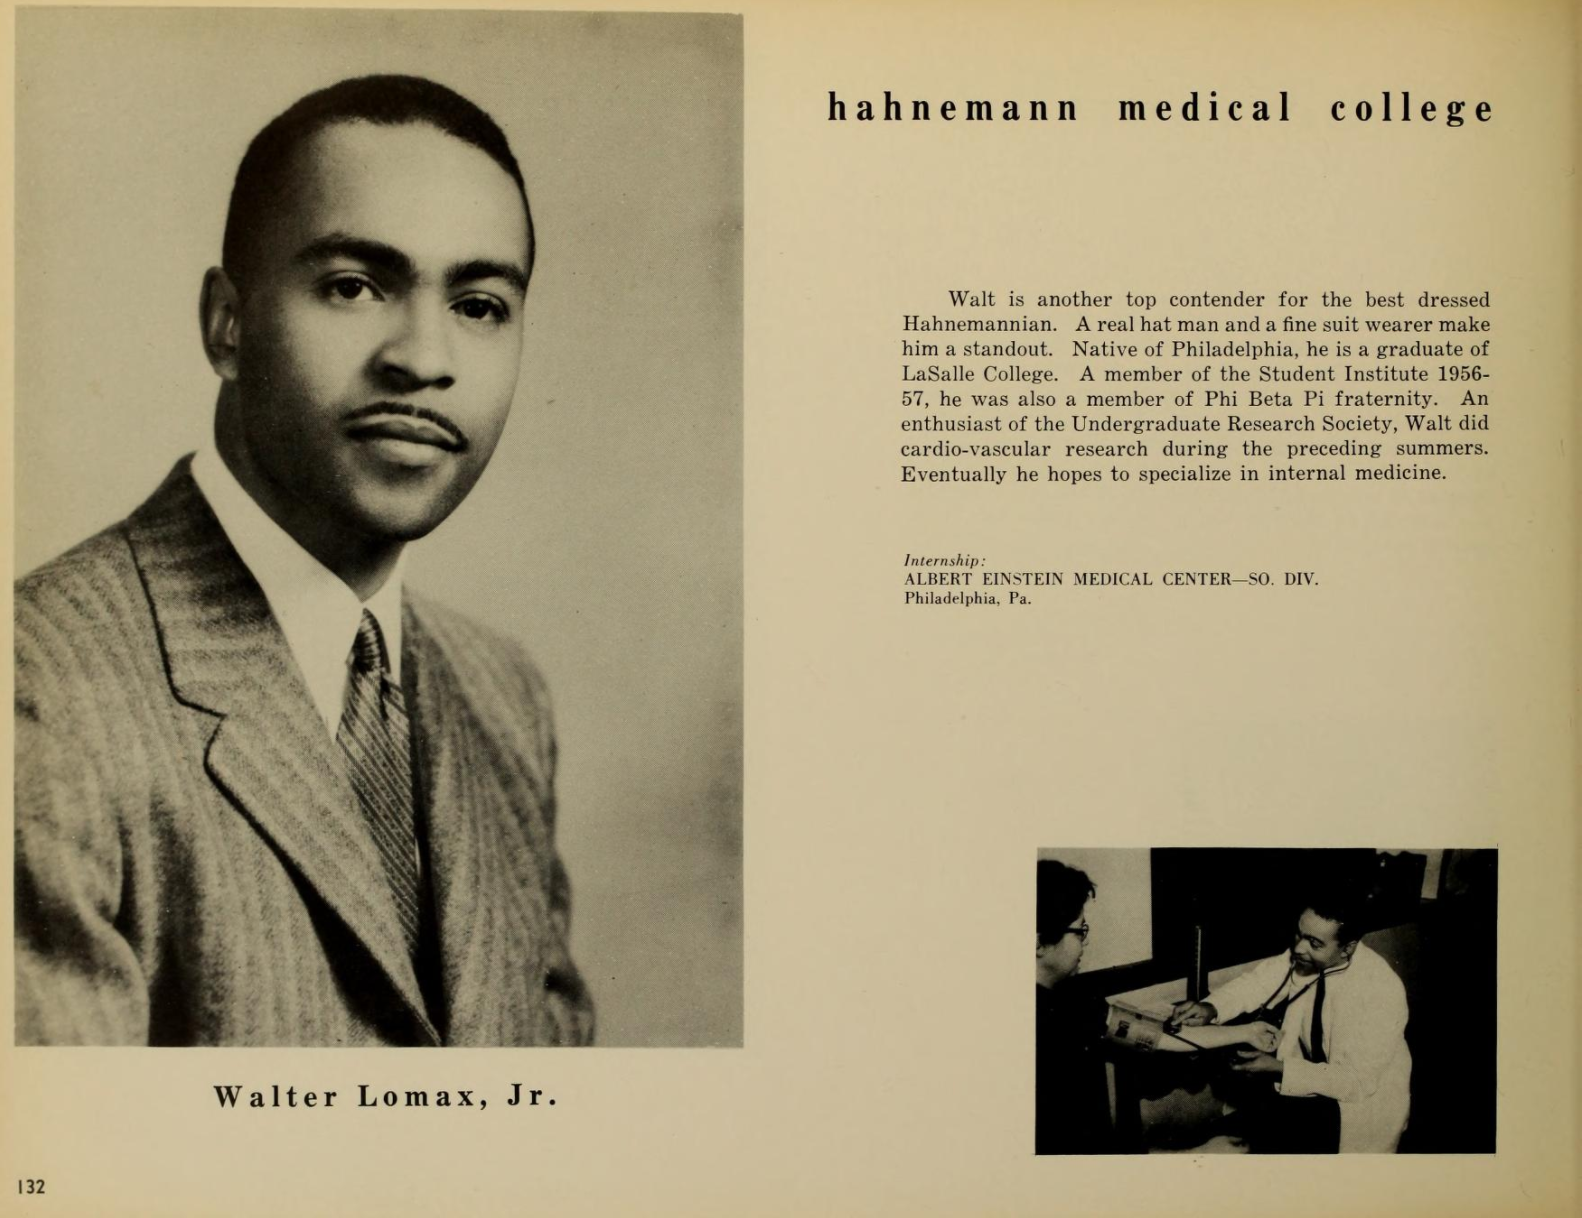 The 1957 Hahnemann yearbook entry for Walter P. Lomax Jr.